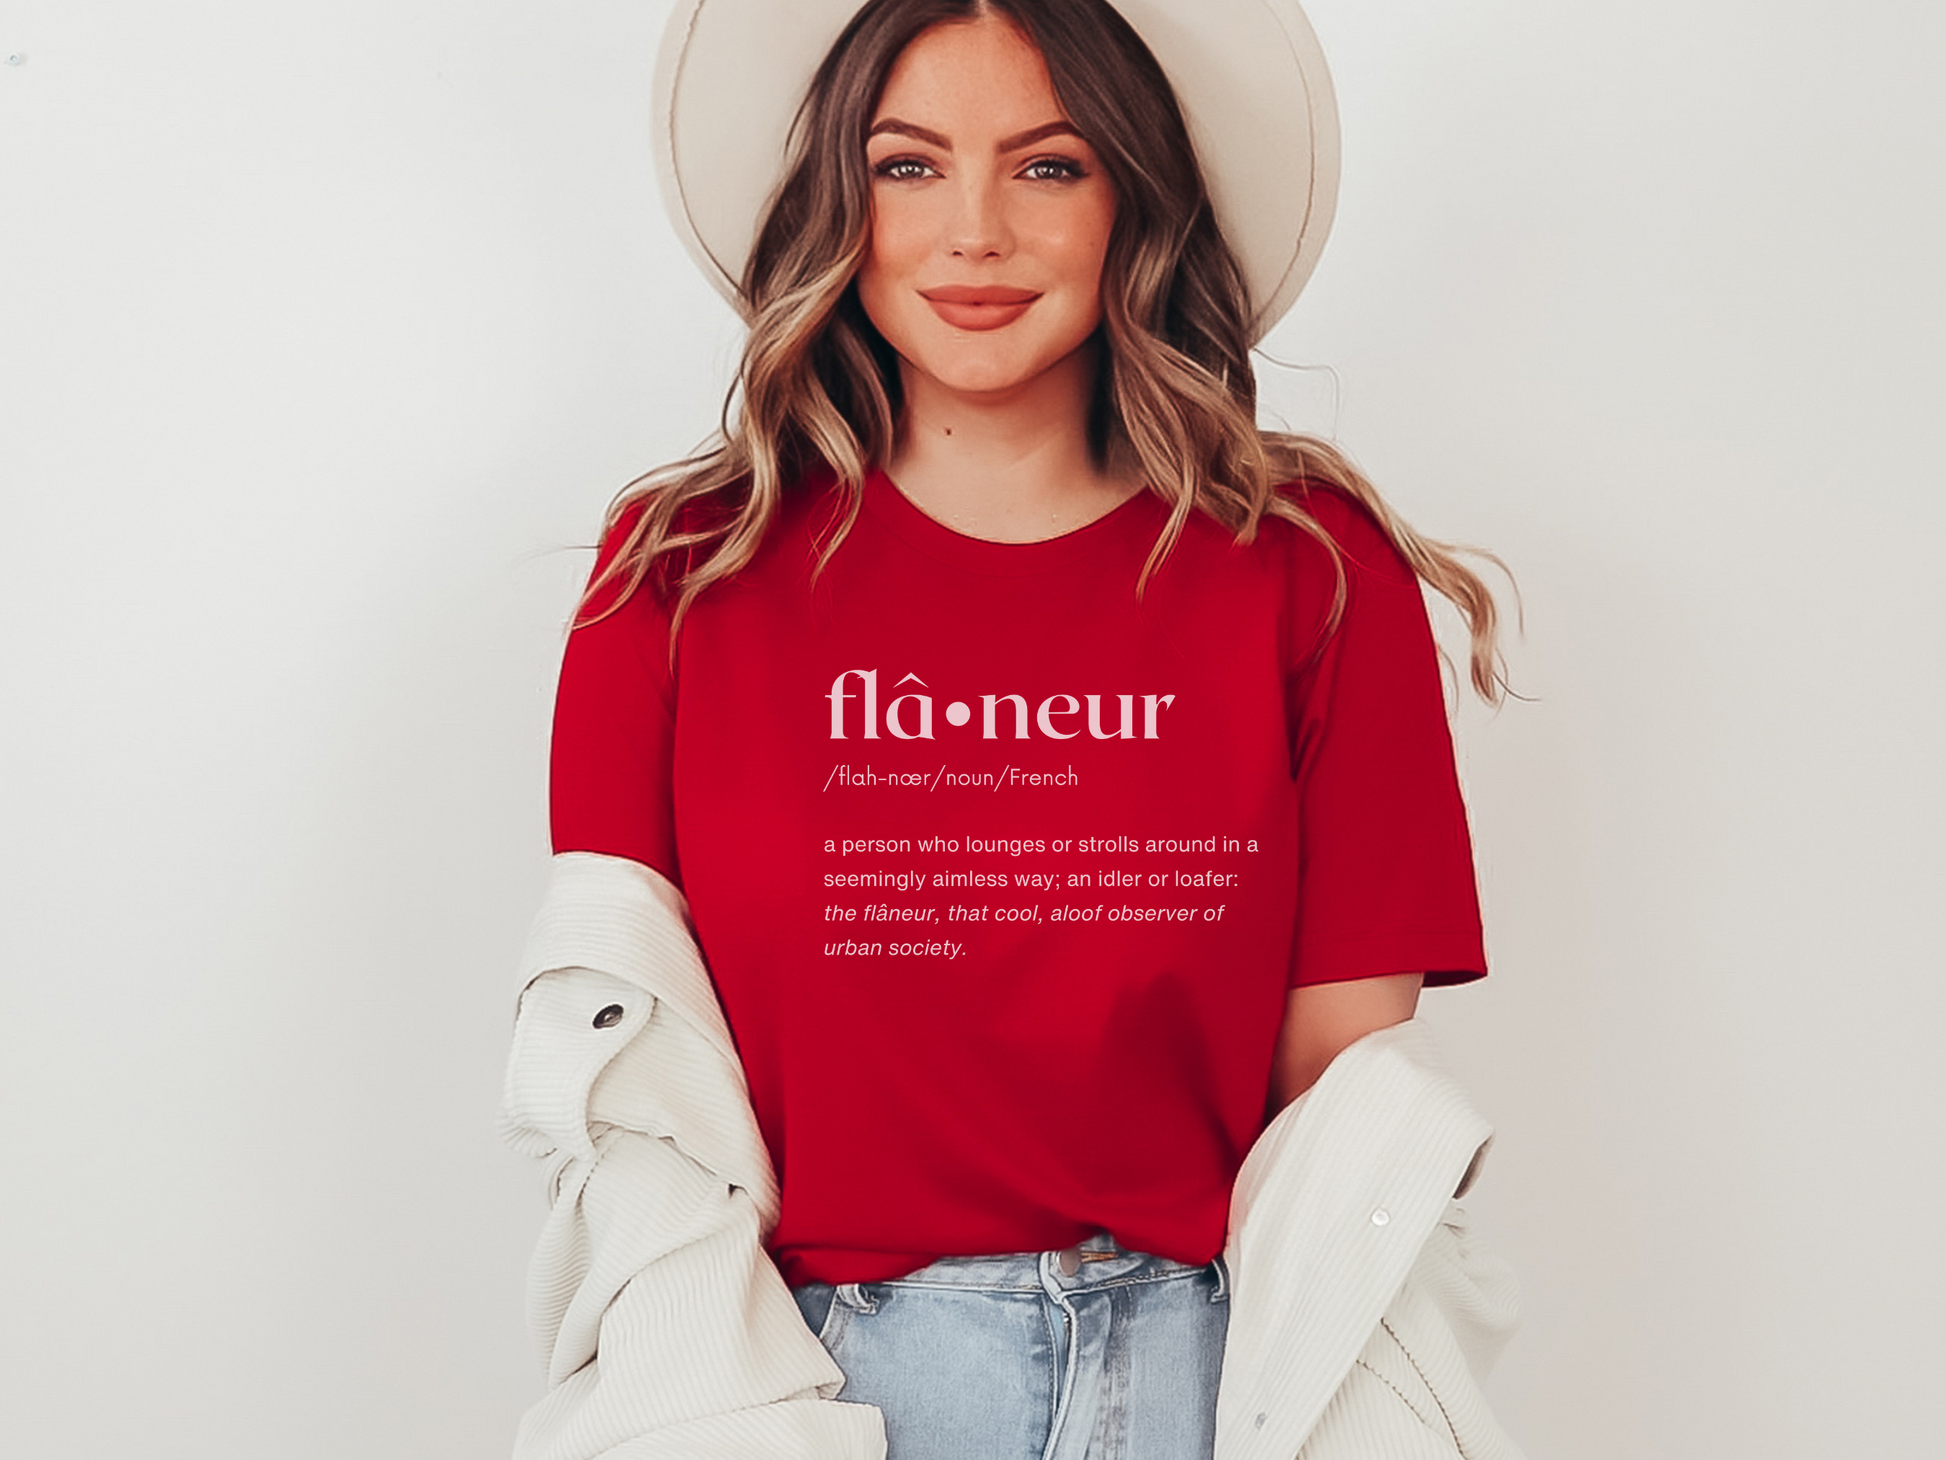 Flâneur "Wanderer" French Word T-Shirt in Red